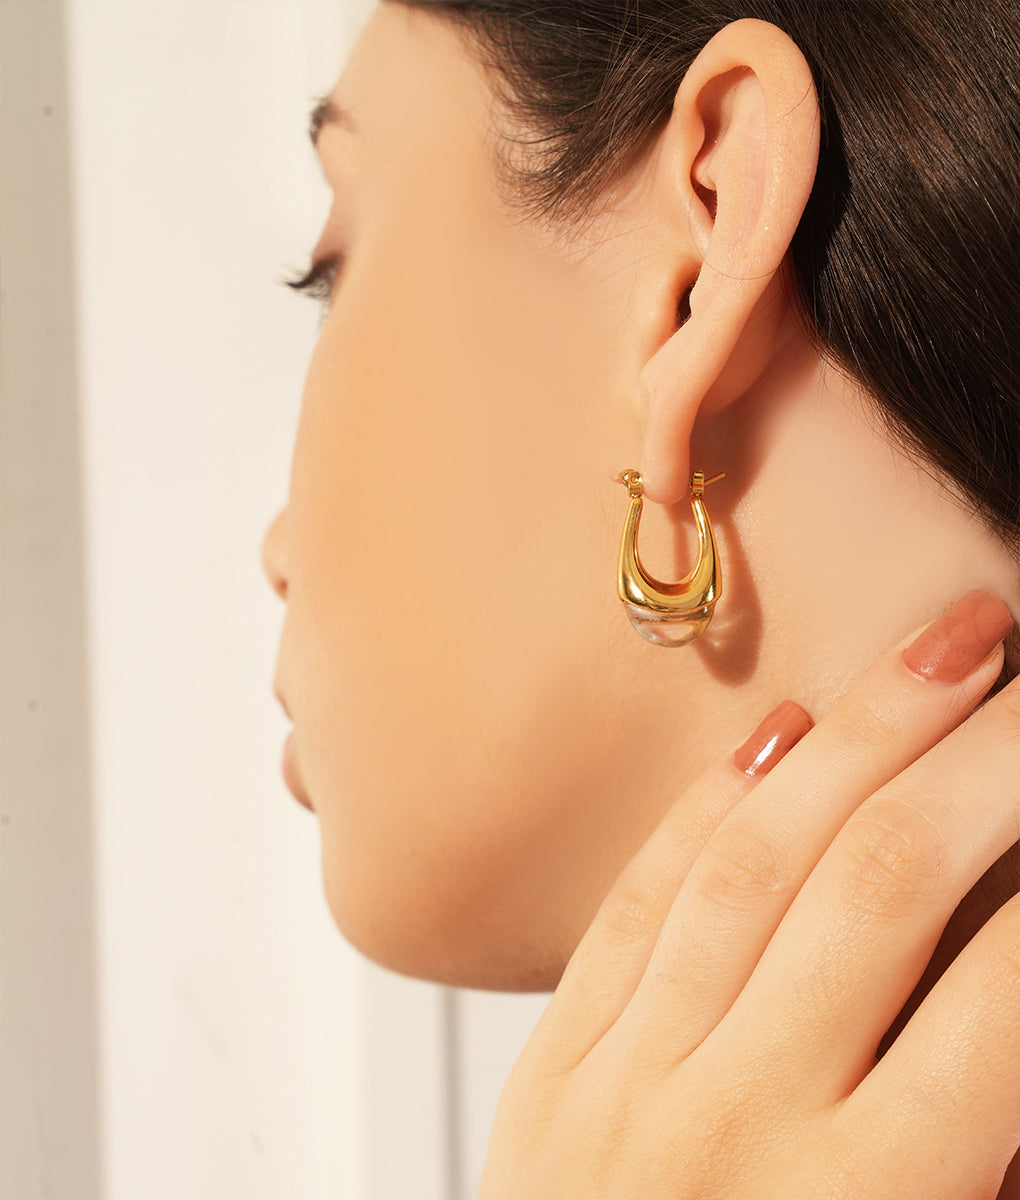 The Emi Gold Resin Hoops